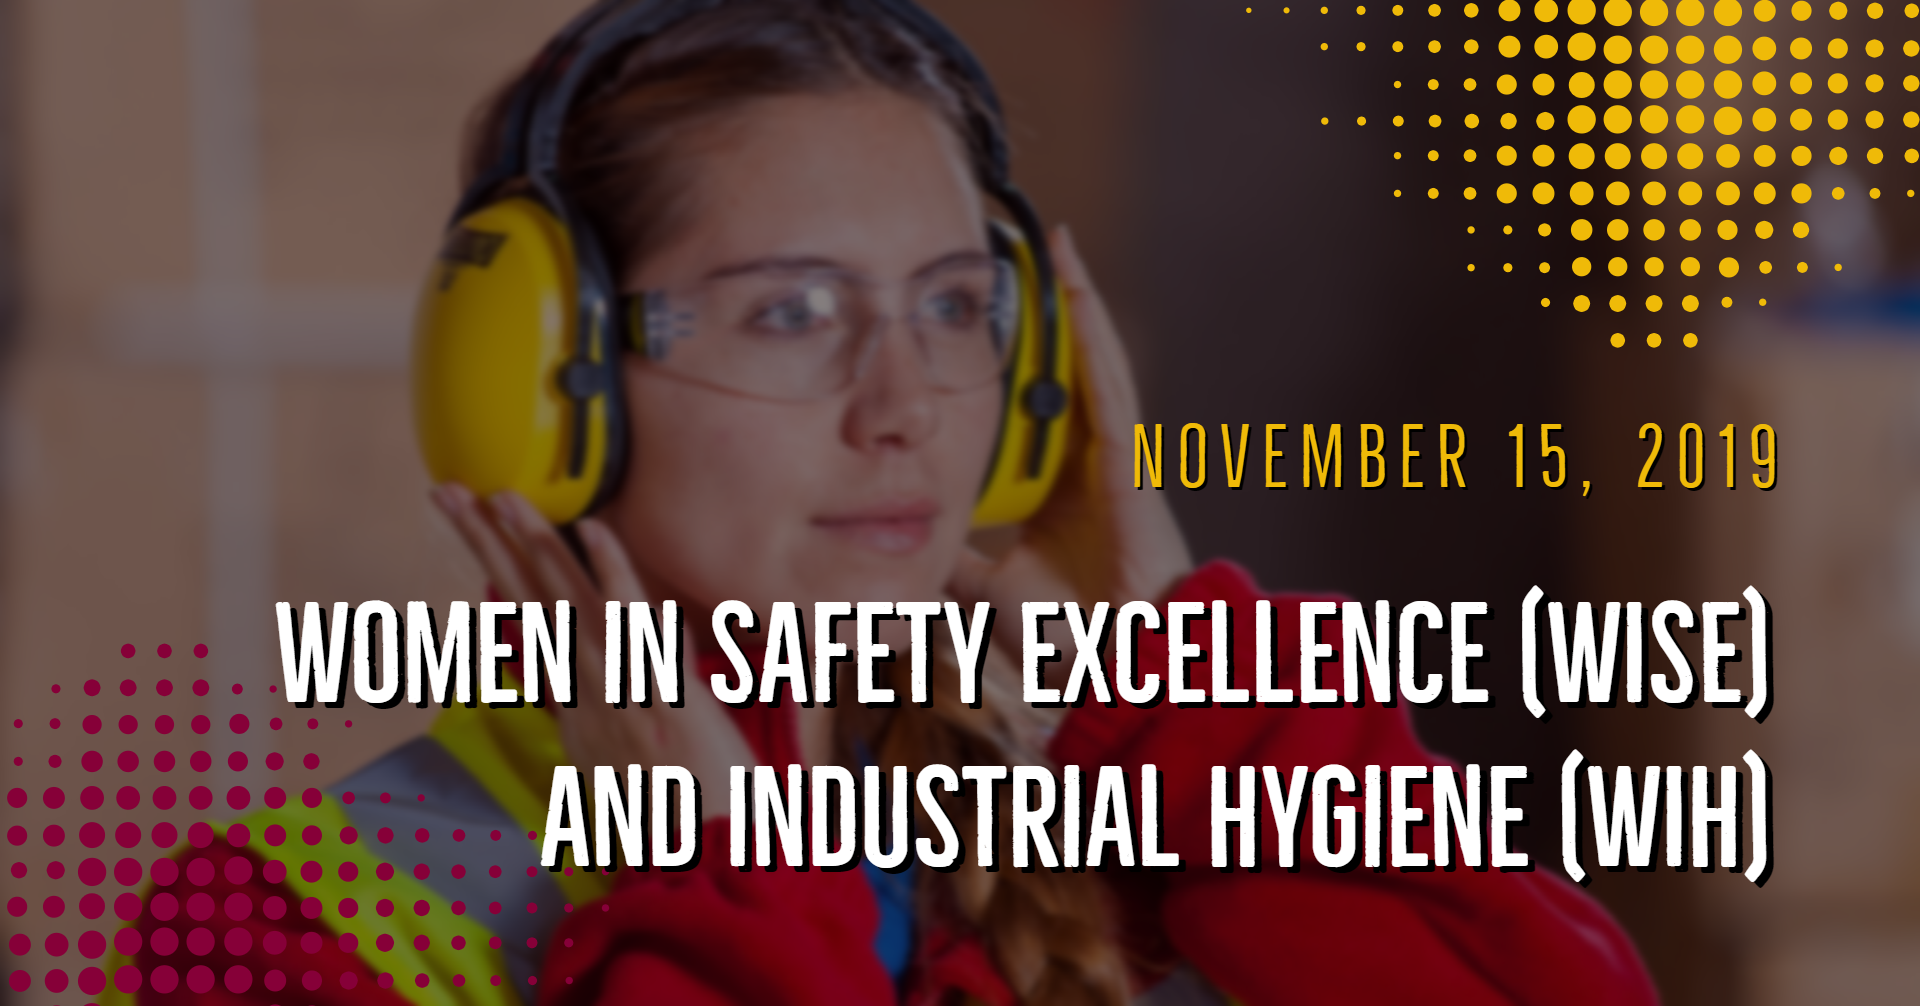 Women in Safety Excellence (WISE) and Industrial Hygiene (WIH)